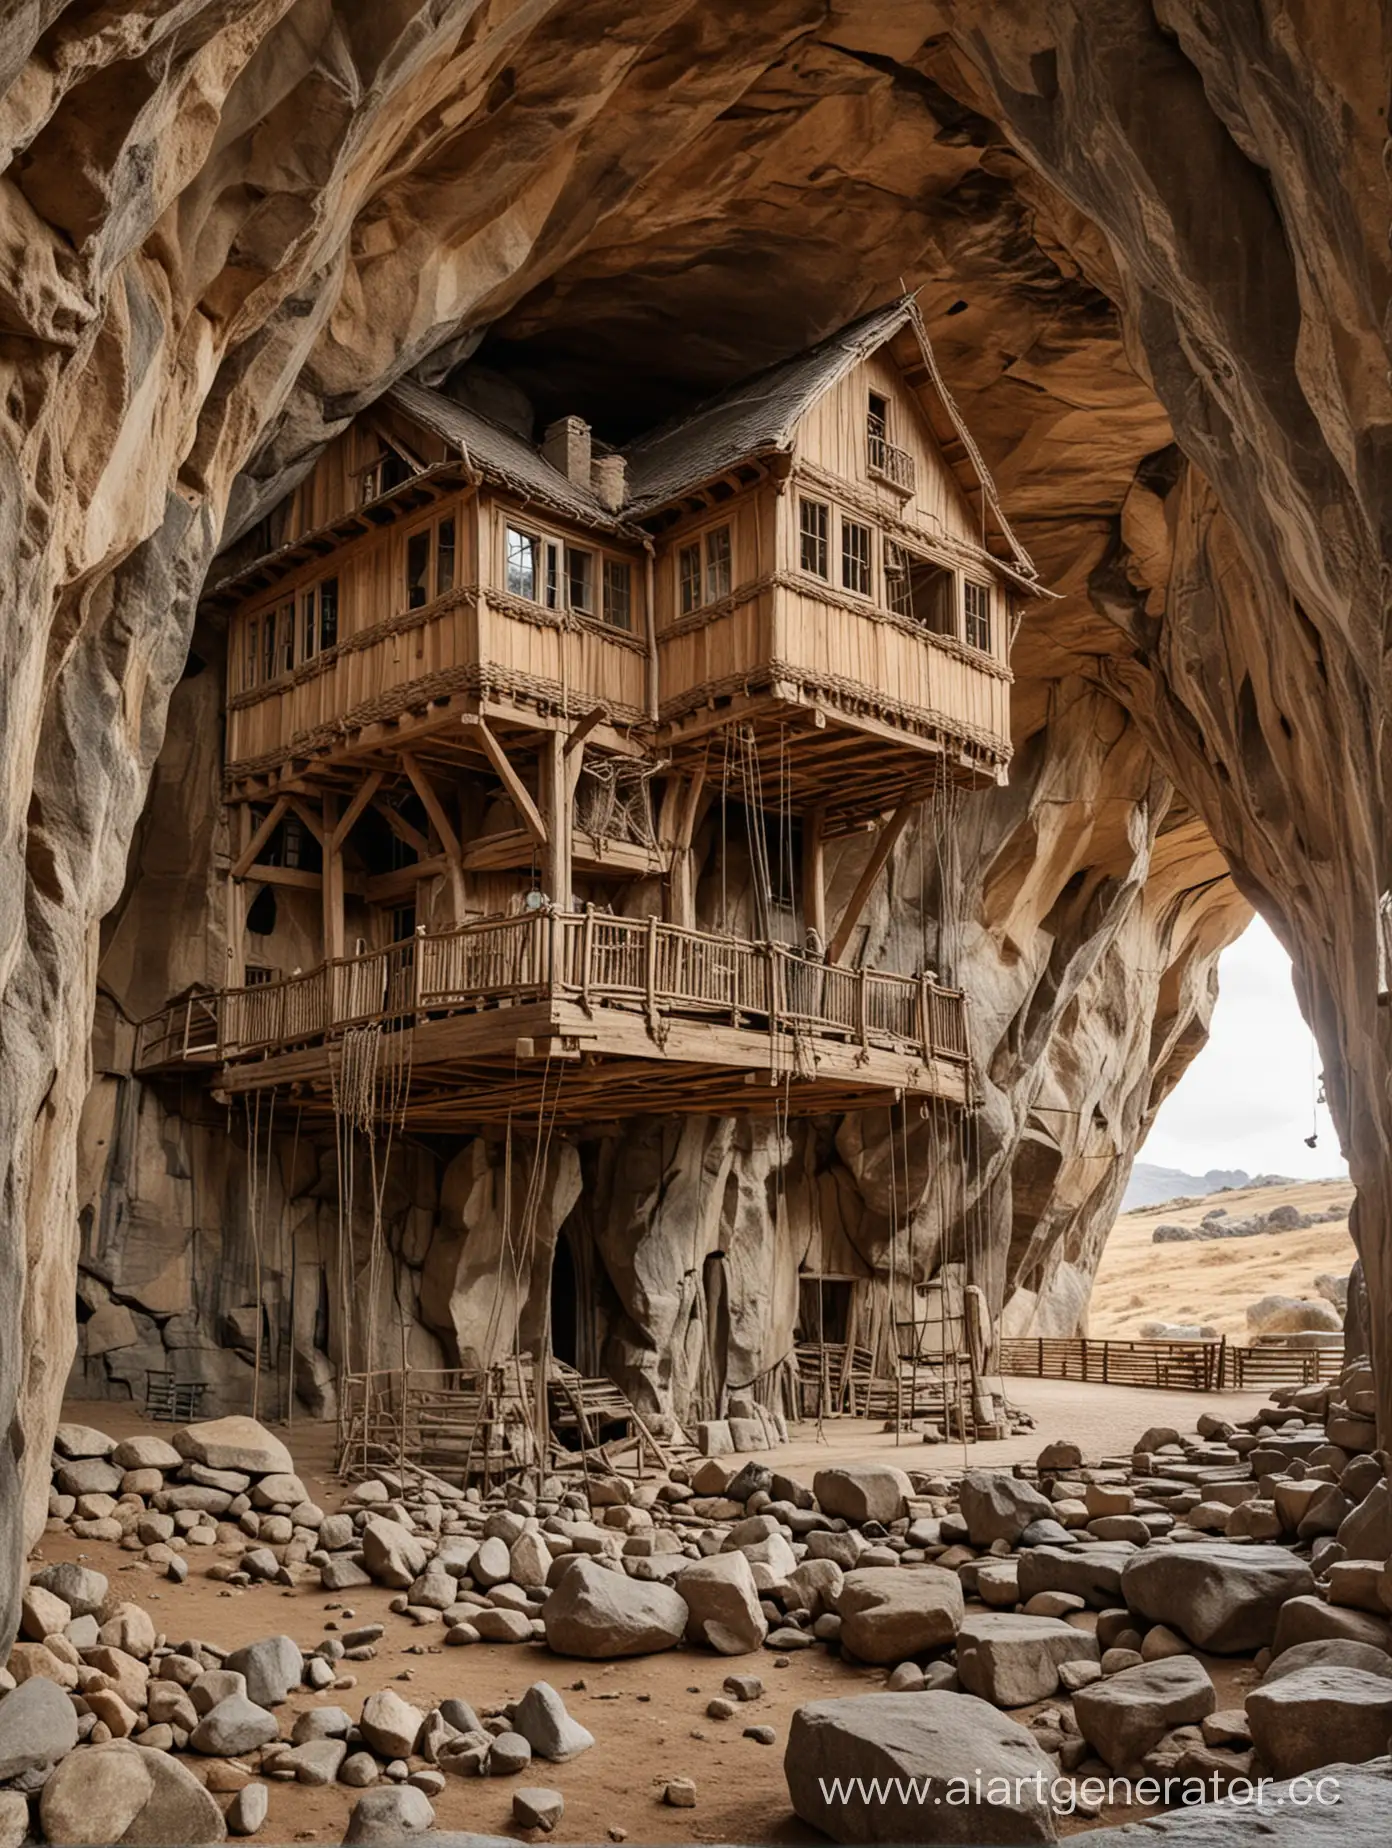 Enormous-Wooden-House-Perched-atop-Rock-Formation-Supported-by-Beams-and-Ropes